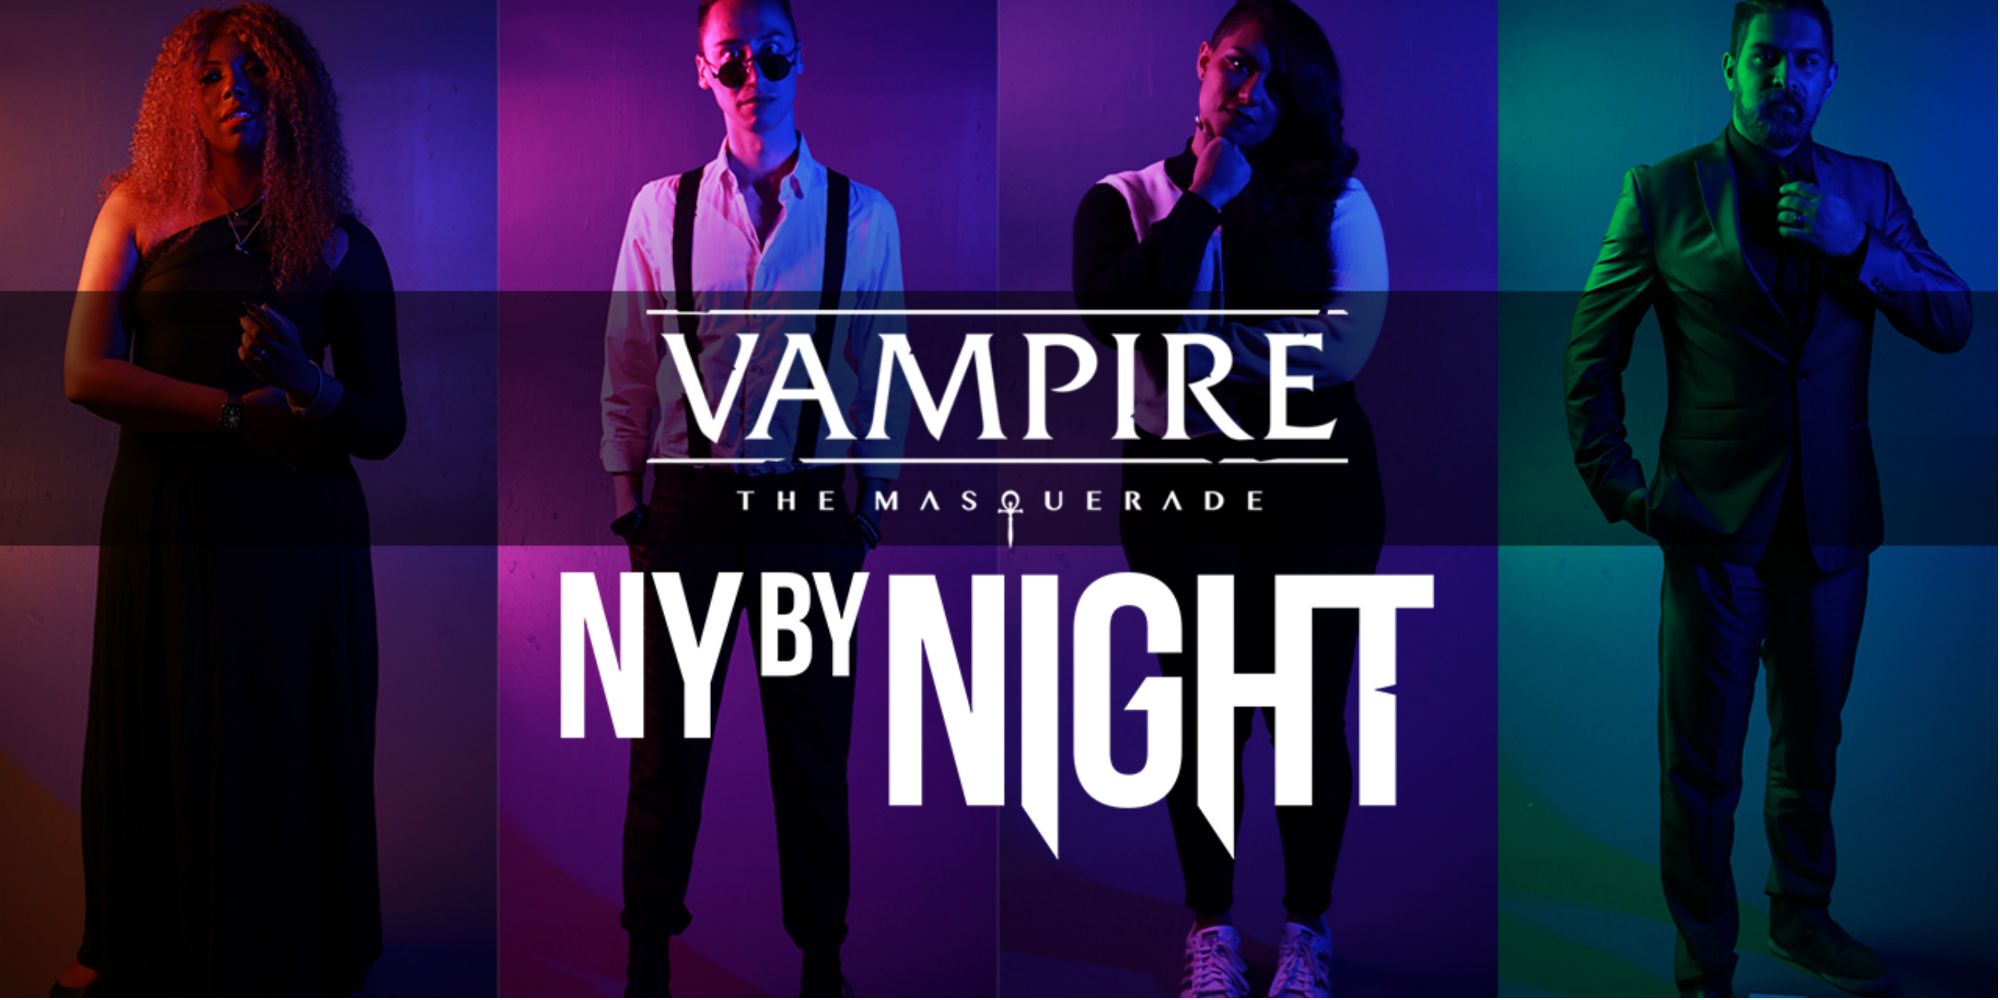 Vampire: The Masquerade: Seattle By Night Season Two Arrives This Halloween